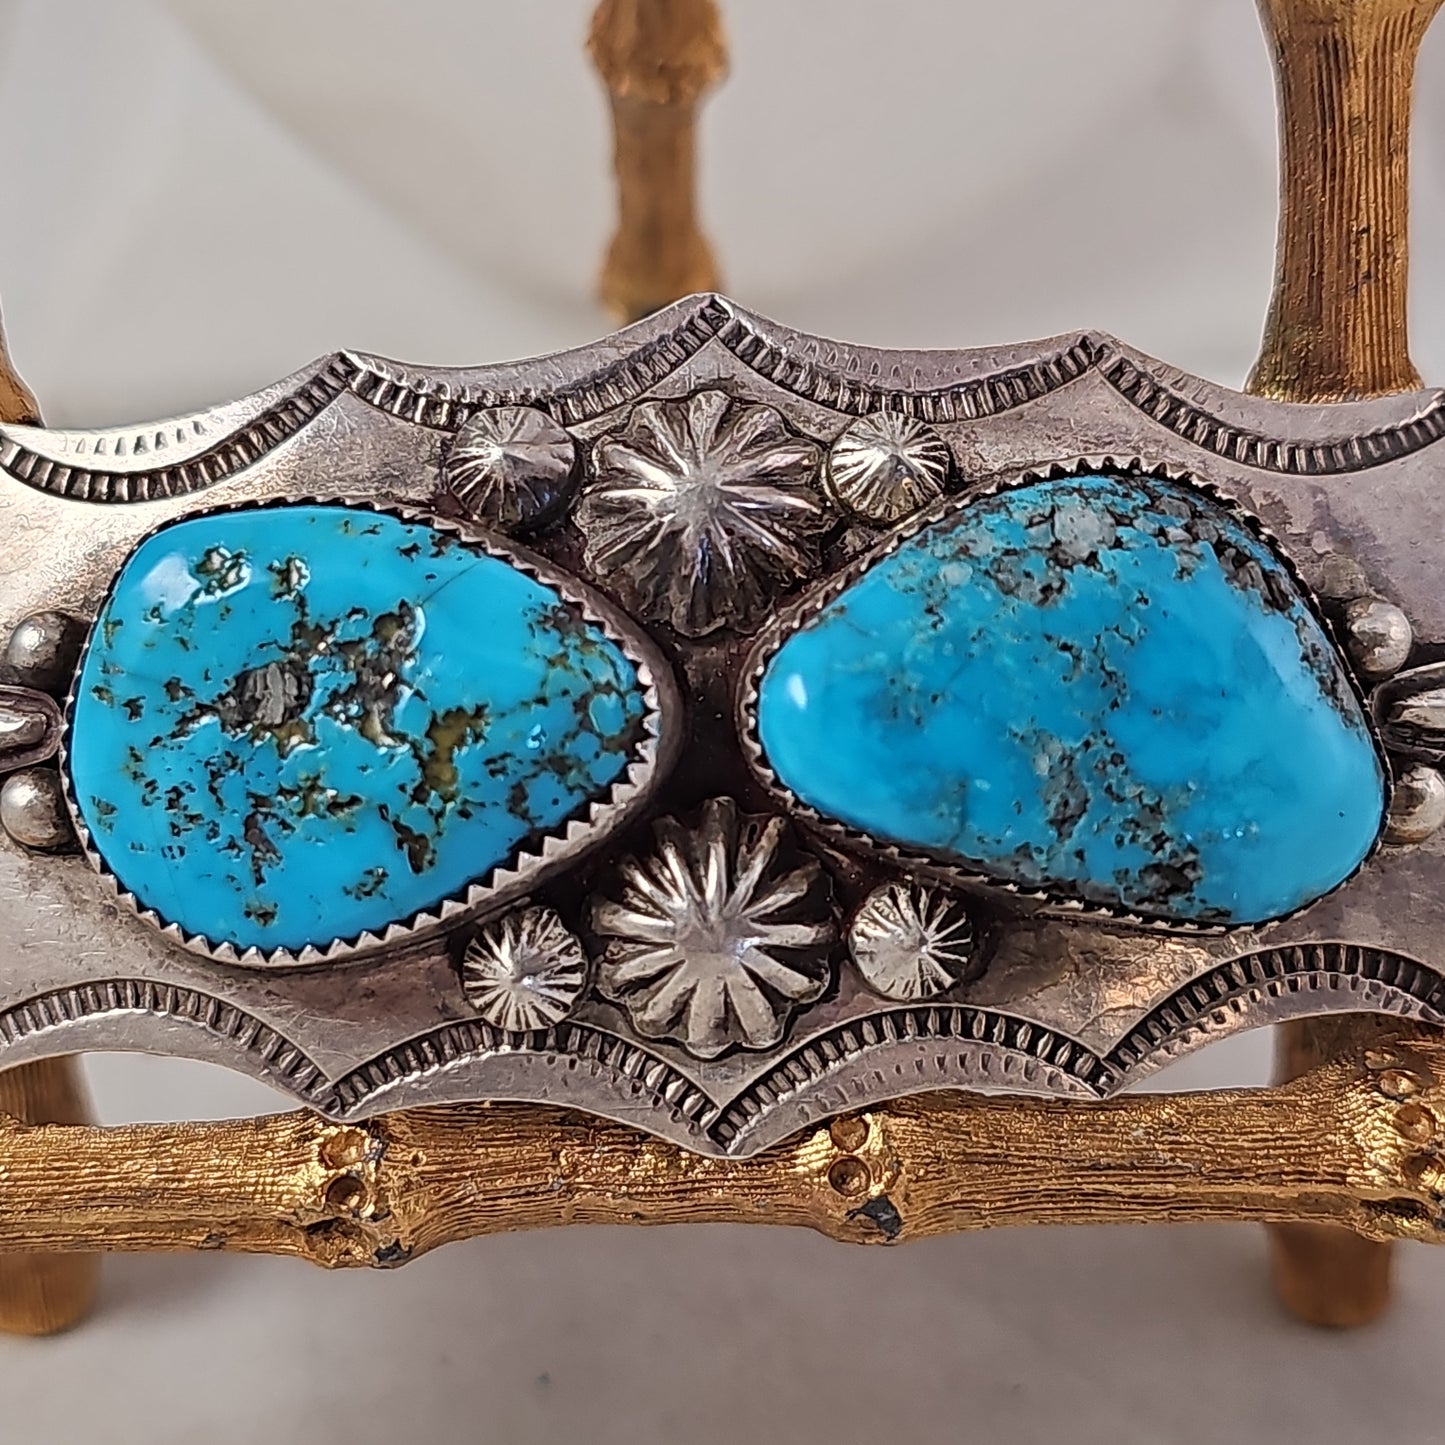 Heavy turquoise and sterling hair barrette. Signed by the artist. 4-1/4 × 1-3/4"